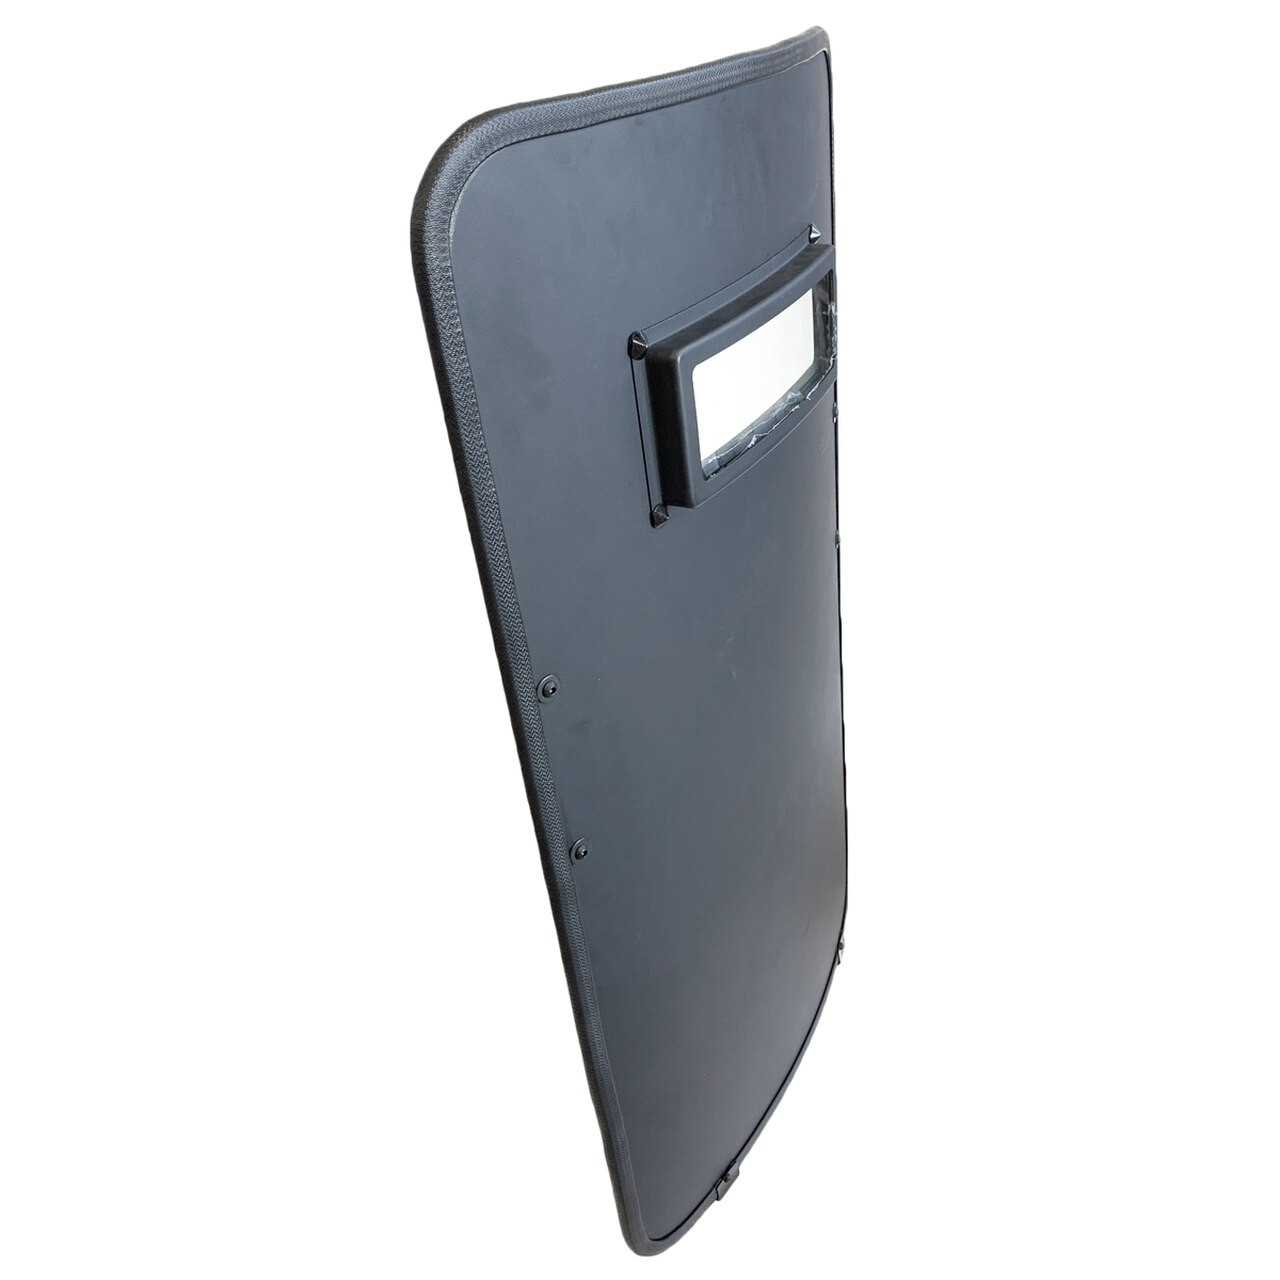 Ballistic Shield Level IIIA+ 12x24 buy with delivery to the USA - BATTLE  STEEL®️